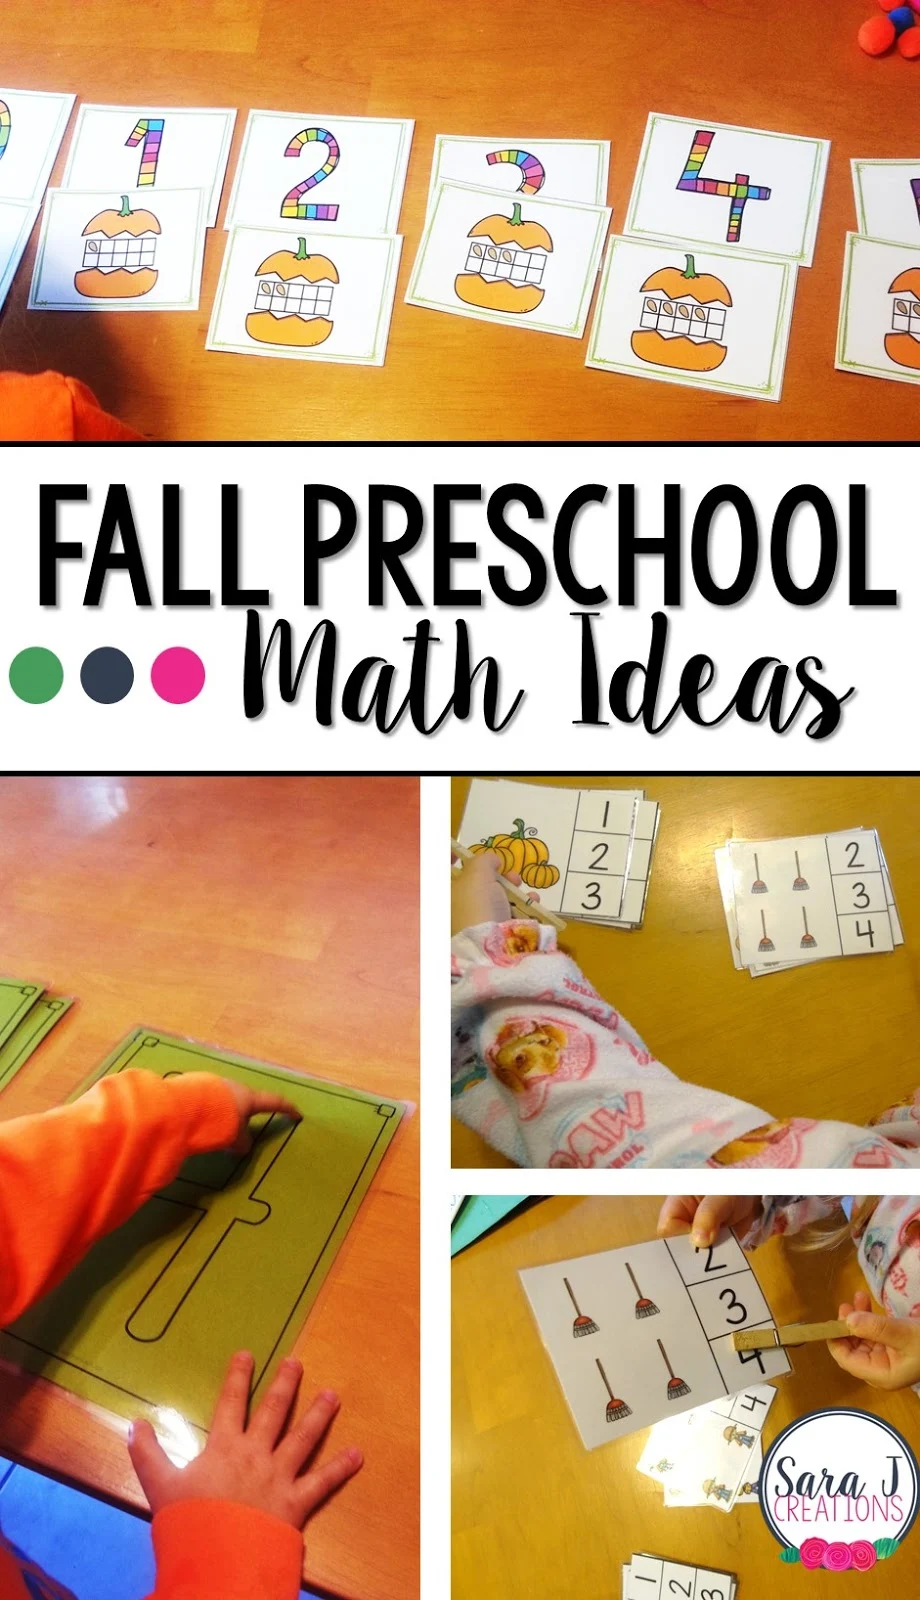 Ideas for fall preschool math practice for preschoolers that focuses on counting and numbers.